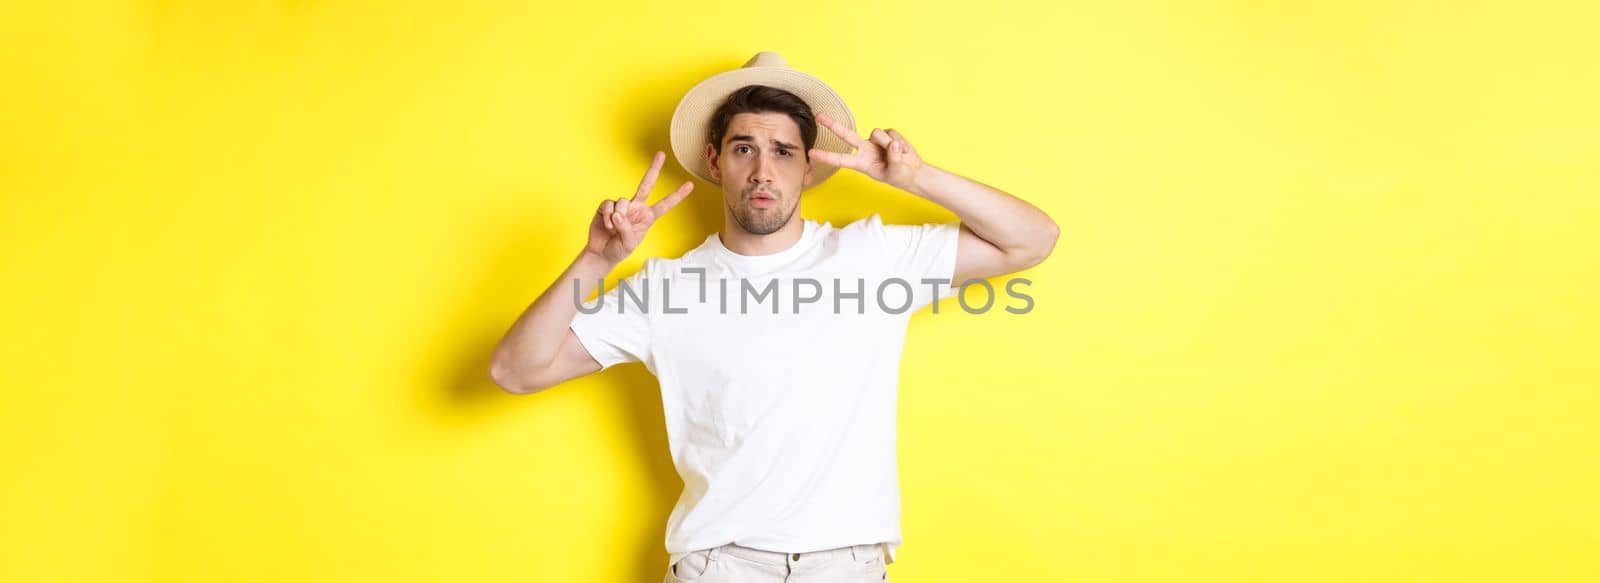 Concept of tourism and vacation. Cool guy taking photo on holidays, posing with peace signs and wearing straw hat, standing against yellow background by Benzoix